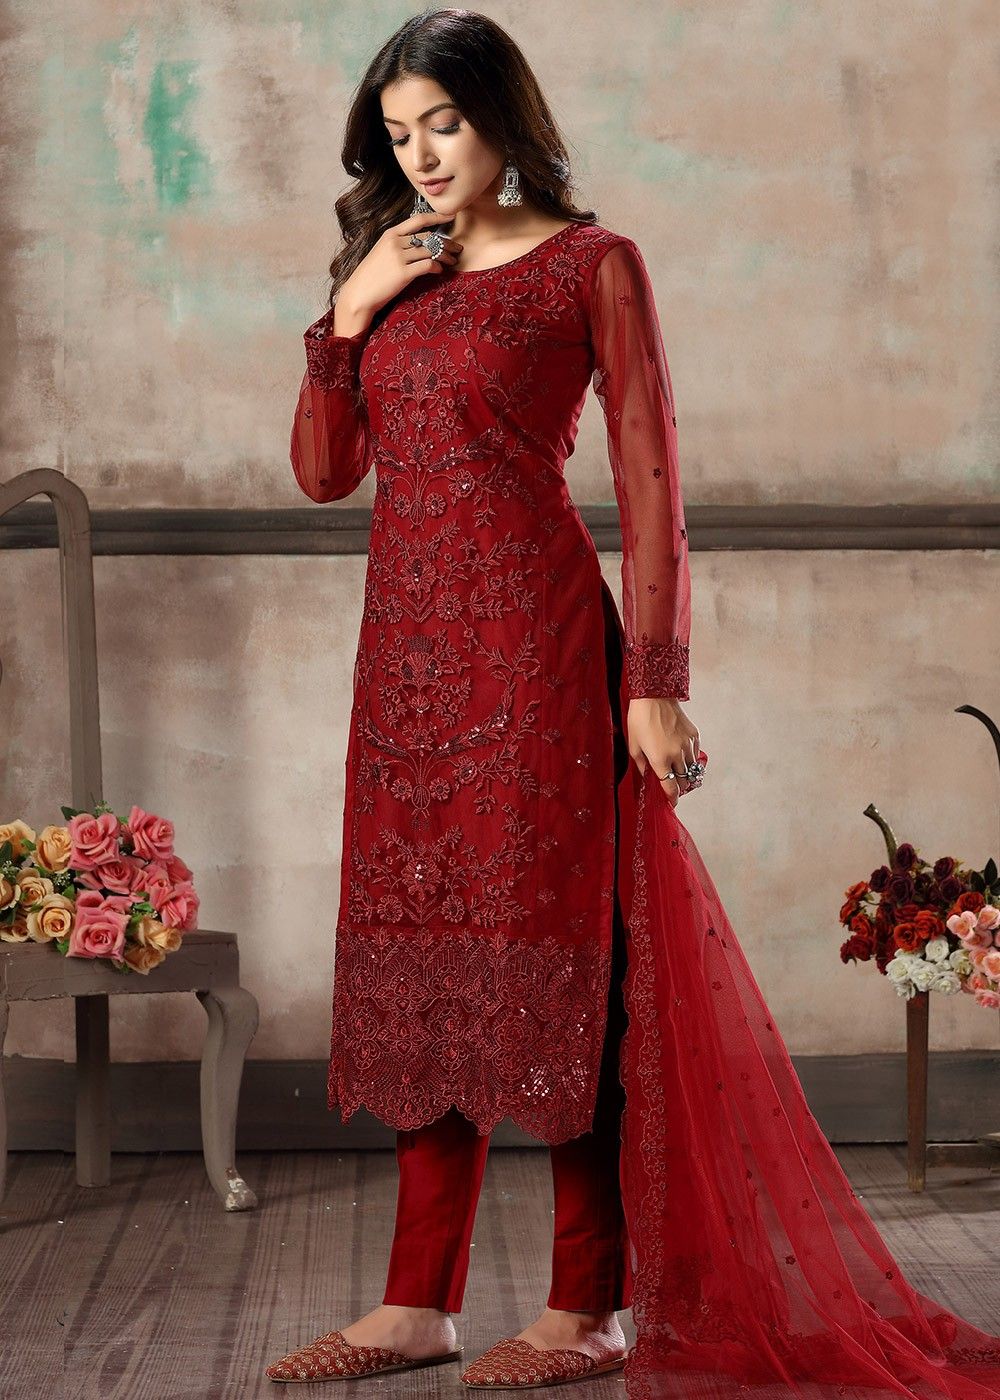 Cotton Salwar Style Pants In Maroon Color | cotrasworld